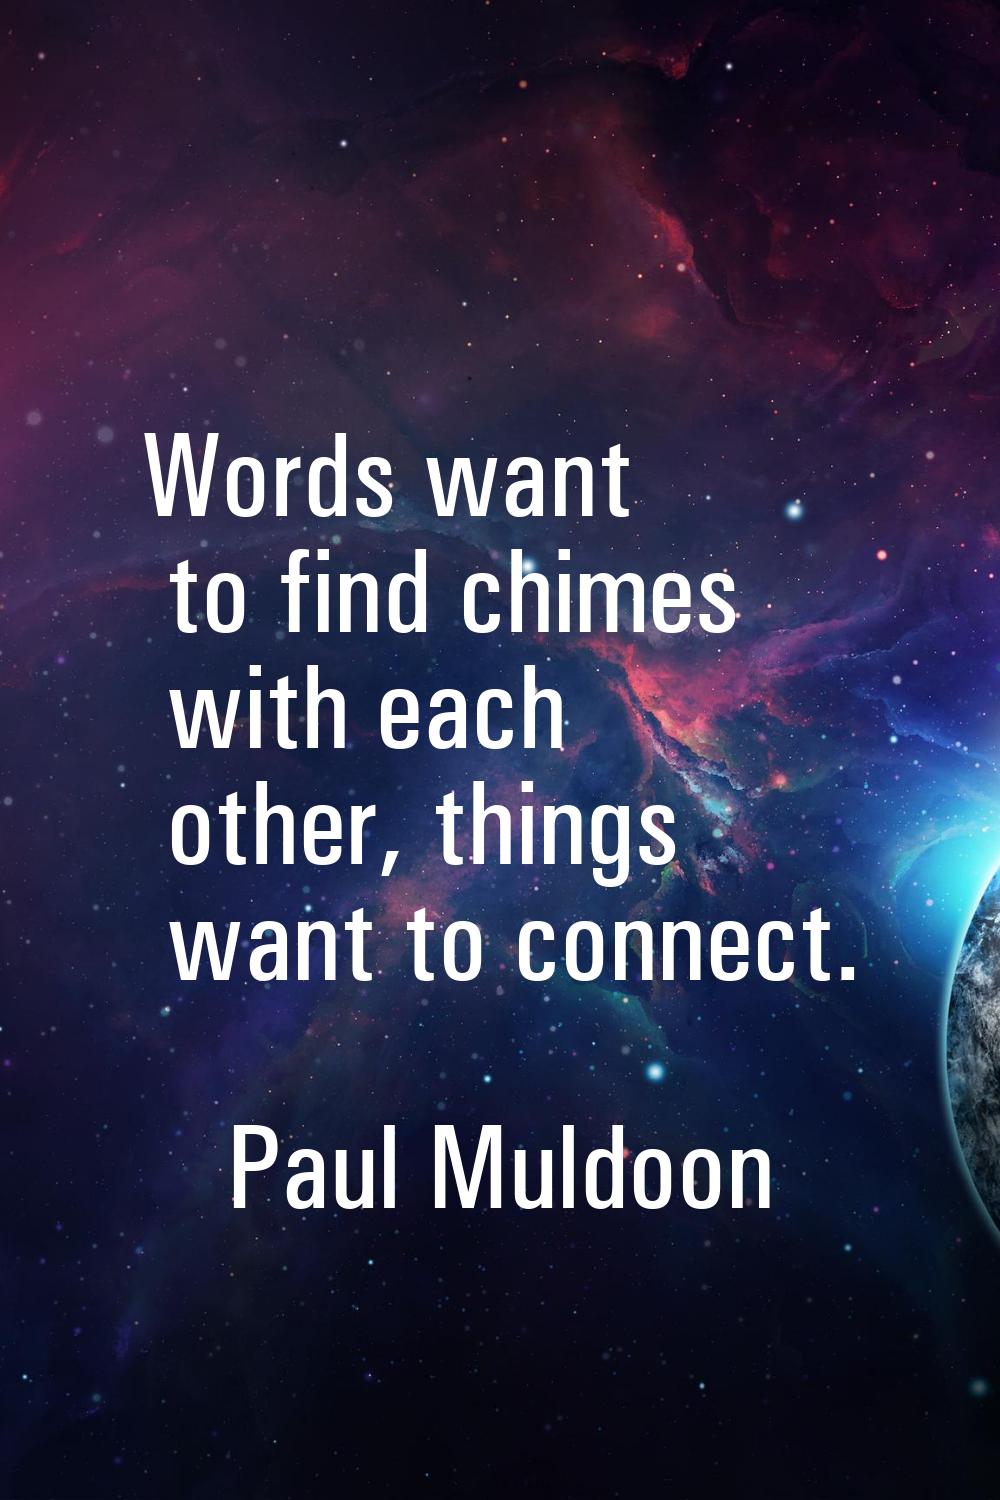 Words want to find chimes with each other, things want to connect.